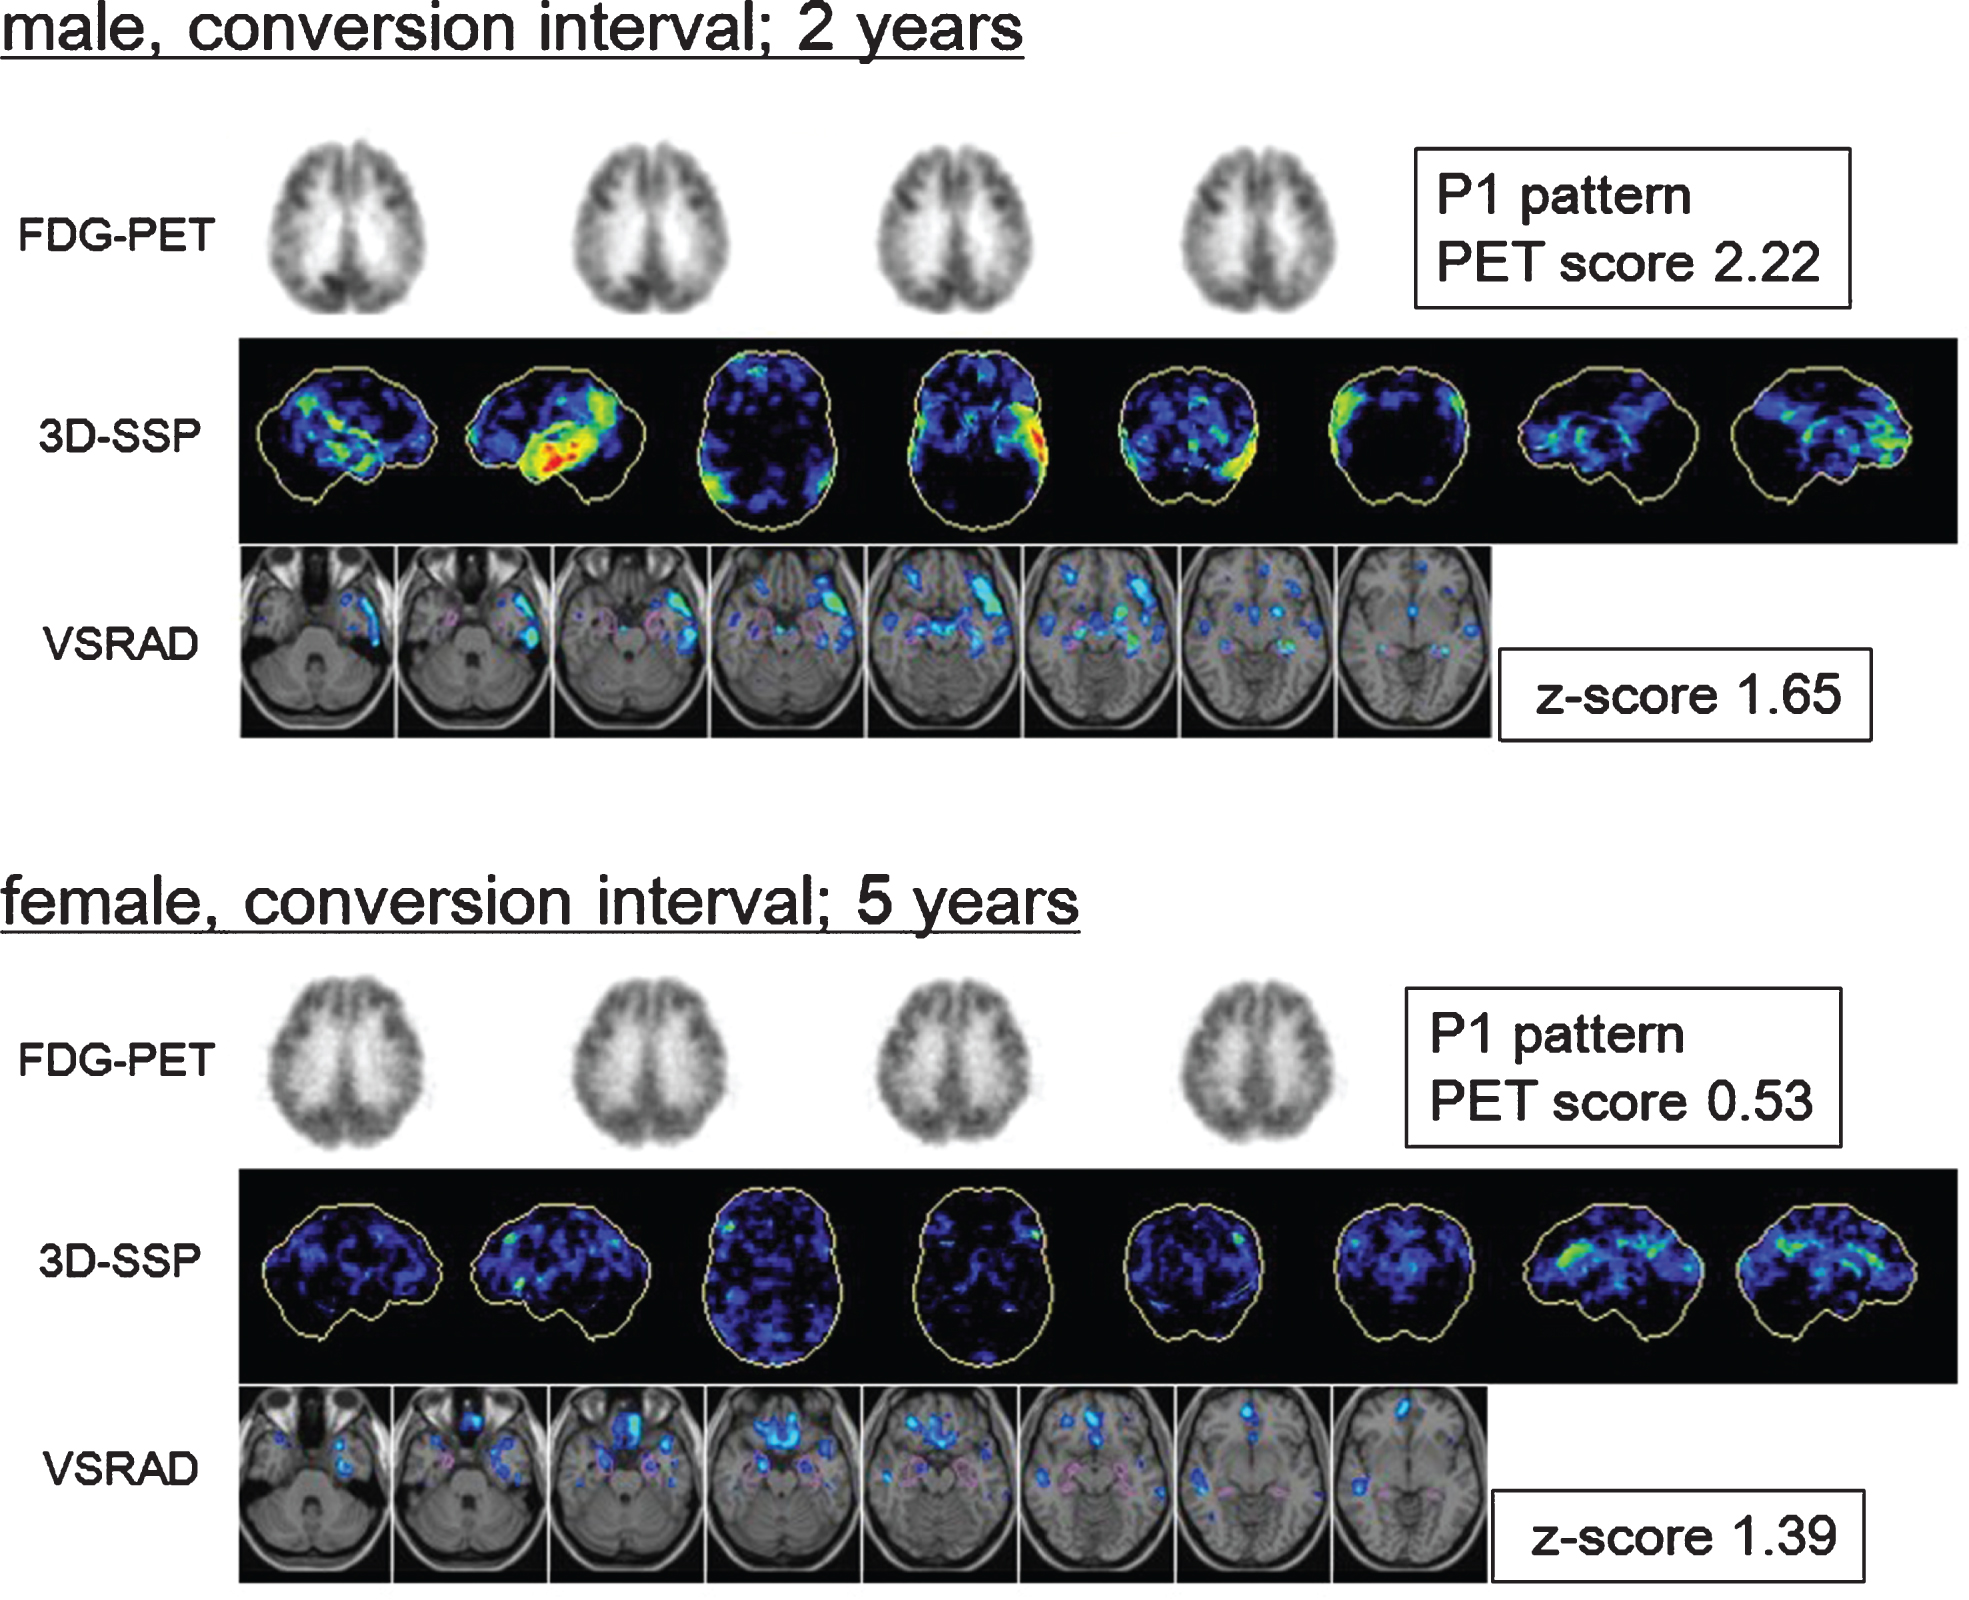 Fluorine-18-fluorodeoxyglucose positron emission tomography (18F-FDG-PET) transaxial images, 3-dimensional stereotactic surface projections (3D-SSP), and voxel-based specific regional analysis system for Alzheimer’s disease (VSRAD) images of patients with mild cognitive impairment (MCI) converted to Alzheimer’s disease (AD). Top: Baseline images of a male patient with MCI who converted during the second year. The 3D-SSP images show hypometabolism in the parietotemporal association cortex, posterior cingulate, and precuneus, mainly on the left side (visual assessment; P1 pattern, PET score = 2.22). The VSRAD images show atrophy in the bilateral temporal lobe including the volume of interest (VOI) placed on the medial temporal structures (VSRAD z-score = 1.65). Bottom: Baseline images of a patient with MCI who converted in the fifth year. The 3D-SSP images show slight hypometabolism in the parietotemporal association cortex, posterior cingulate, and precuneus (visual assessment; P1 pattern, PET score = 0.53). The VSRAD images show mild atrophy in the target VOI (VSRAD z-score = 1.39). The earlier converter exhibited clearer AD-like changes at baseline than slower converter did.